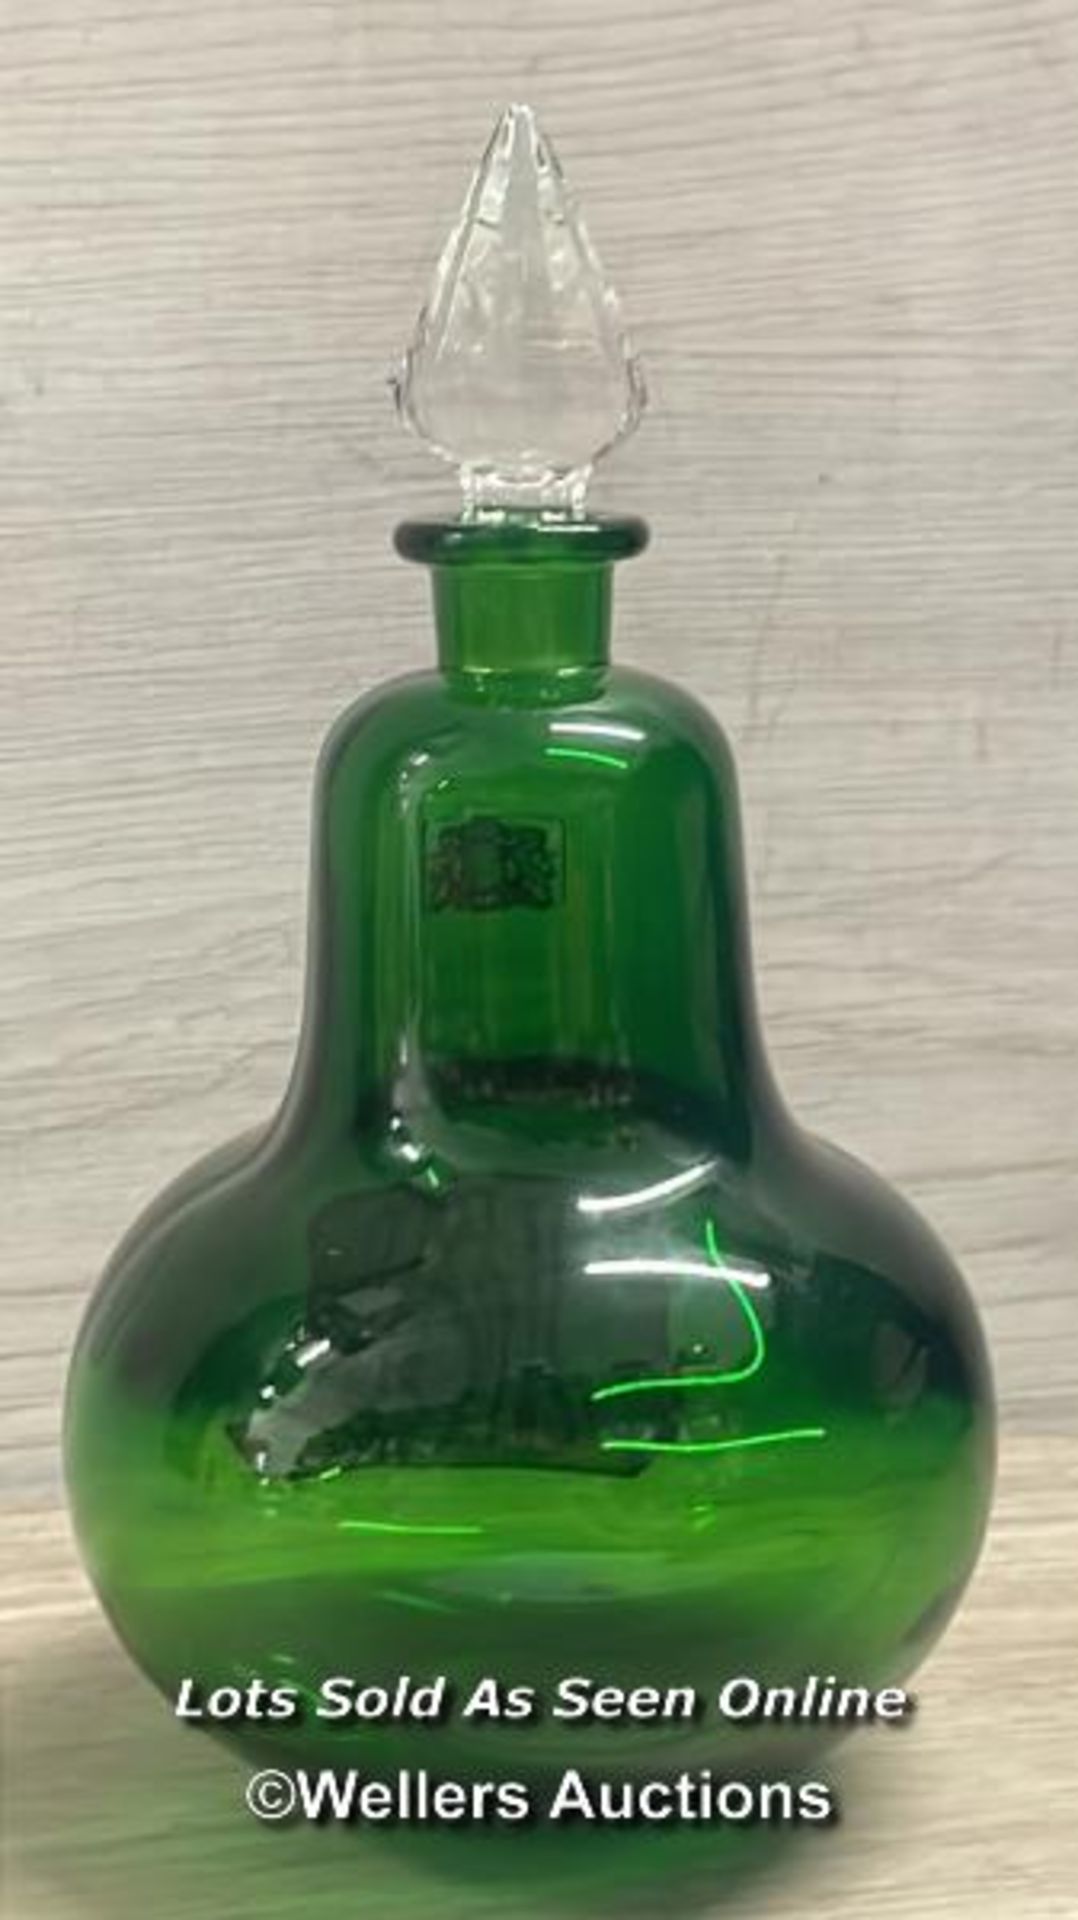 A RARE ROYAL PHARMACEUTICAL SOCIETY APOTHECARY BOTTLE, C1960'S, IN GREEN GLASS WITH GOLD LEAF - Image 5 of 5